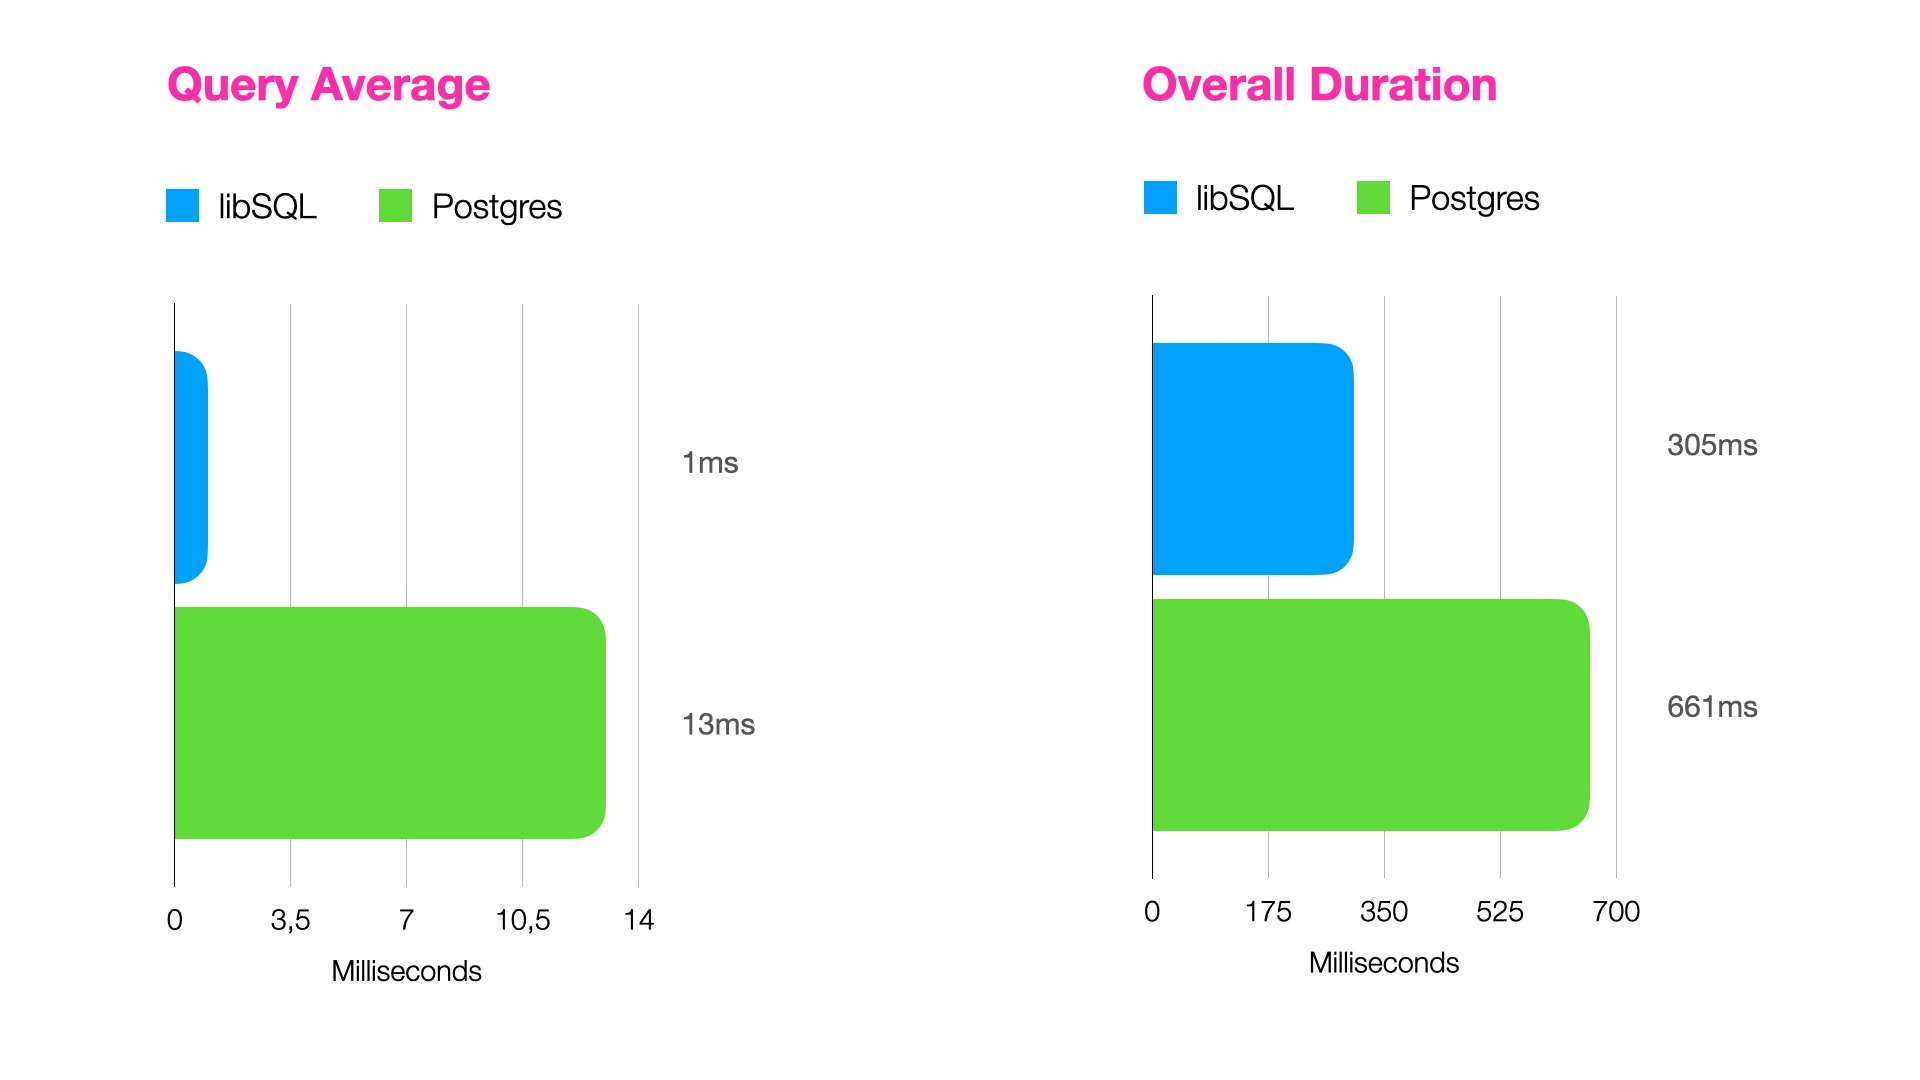 A comparison of performance measurements between Postgres and libSQL. Postgres has an overall time of 661 milliseconds and takes 13 milliseconds per query. On the other hand, libSQL is faster with an overall time of 305 milliseconds, which is the fastest, and takes 1 millisecond per query, also the fastest.